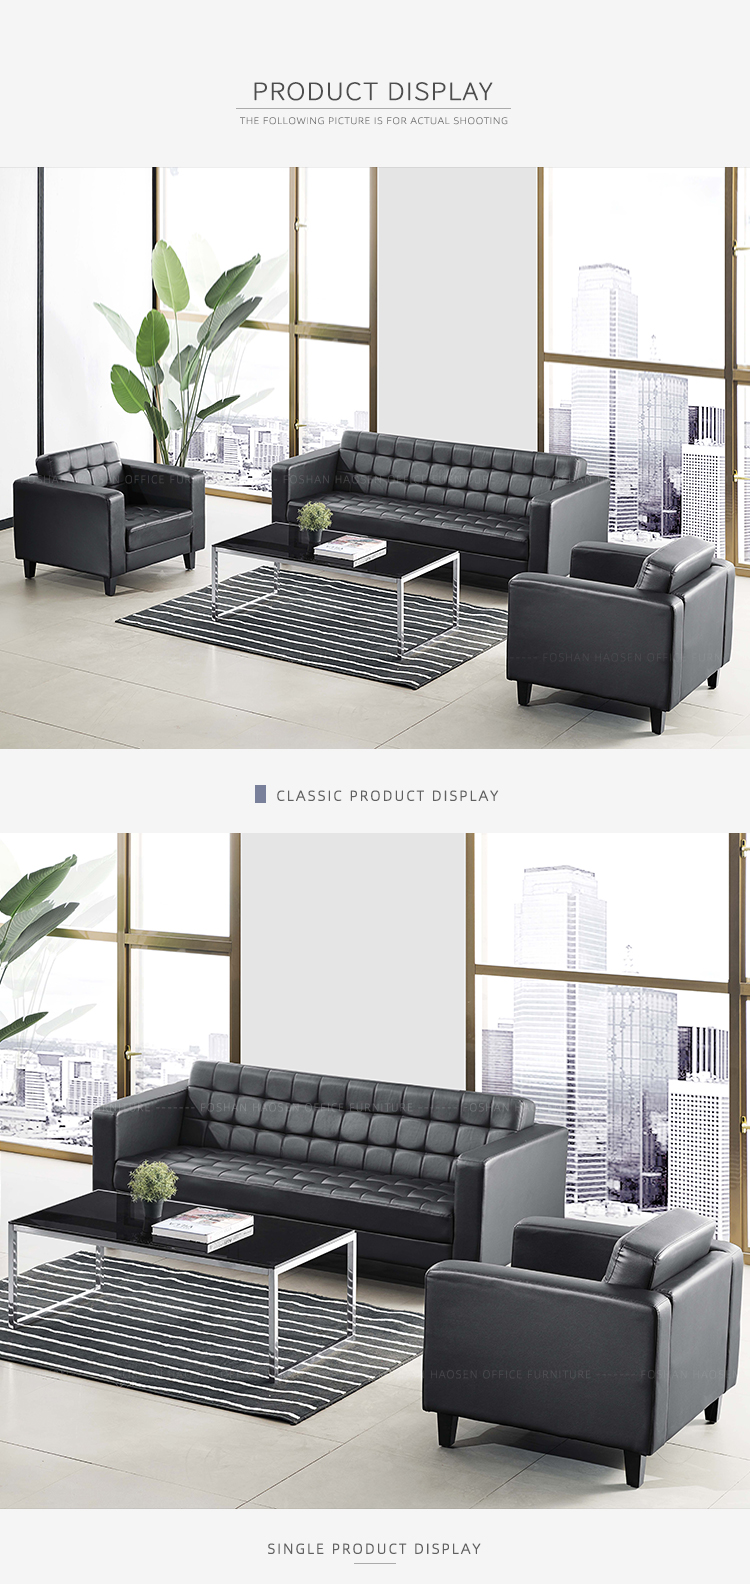 HAOSEN Working office Simple Living Room Grid Leather sofa home set for Sale (SF119,Black PU Leather)